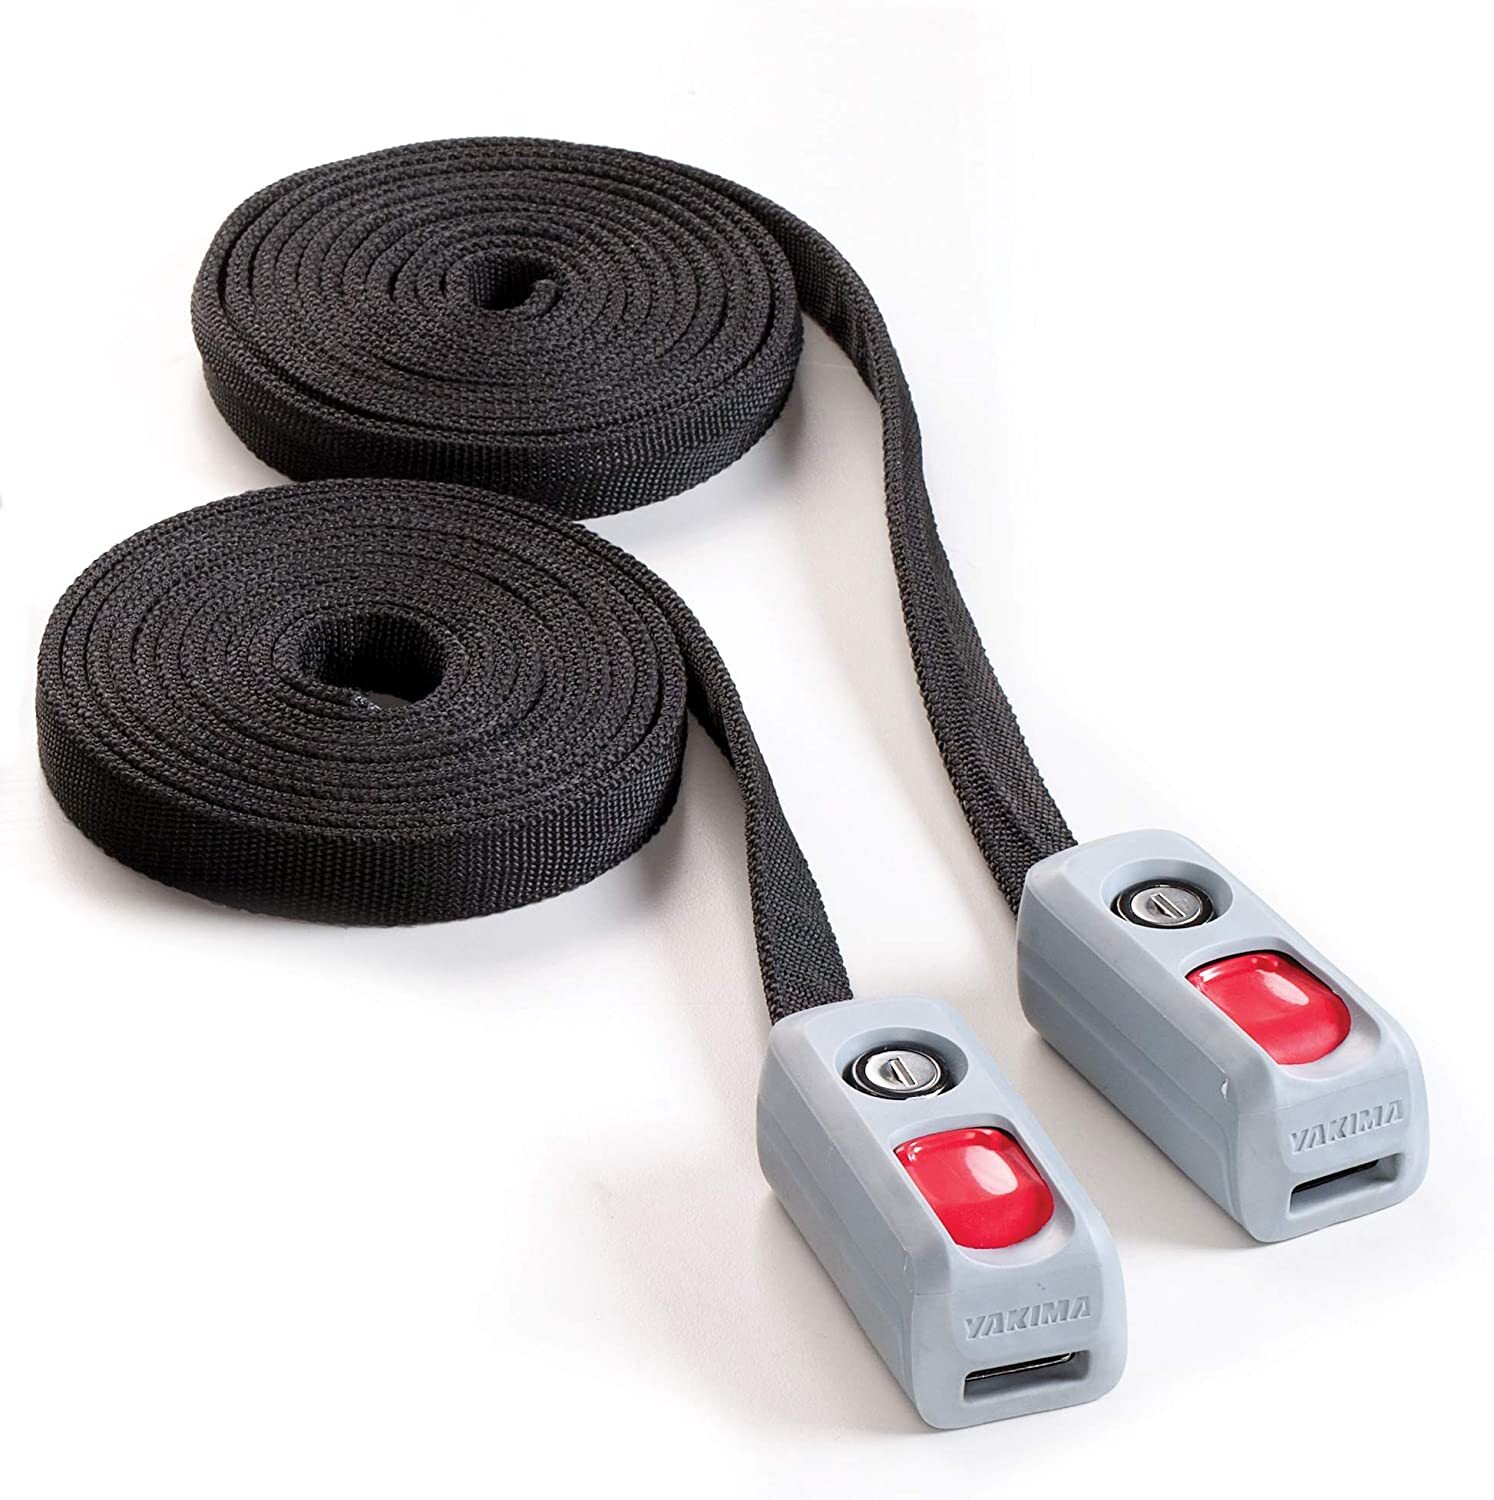 Yakima RipCord Locking Tie-down Cargo Strap To Secure Your Boat Or Boards - Model 8004048